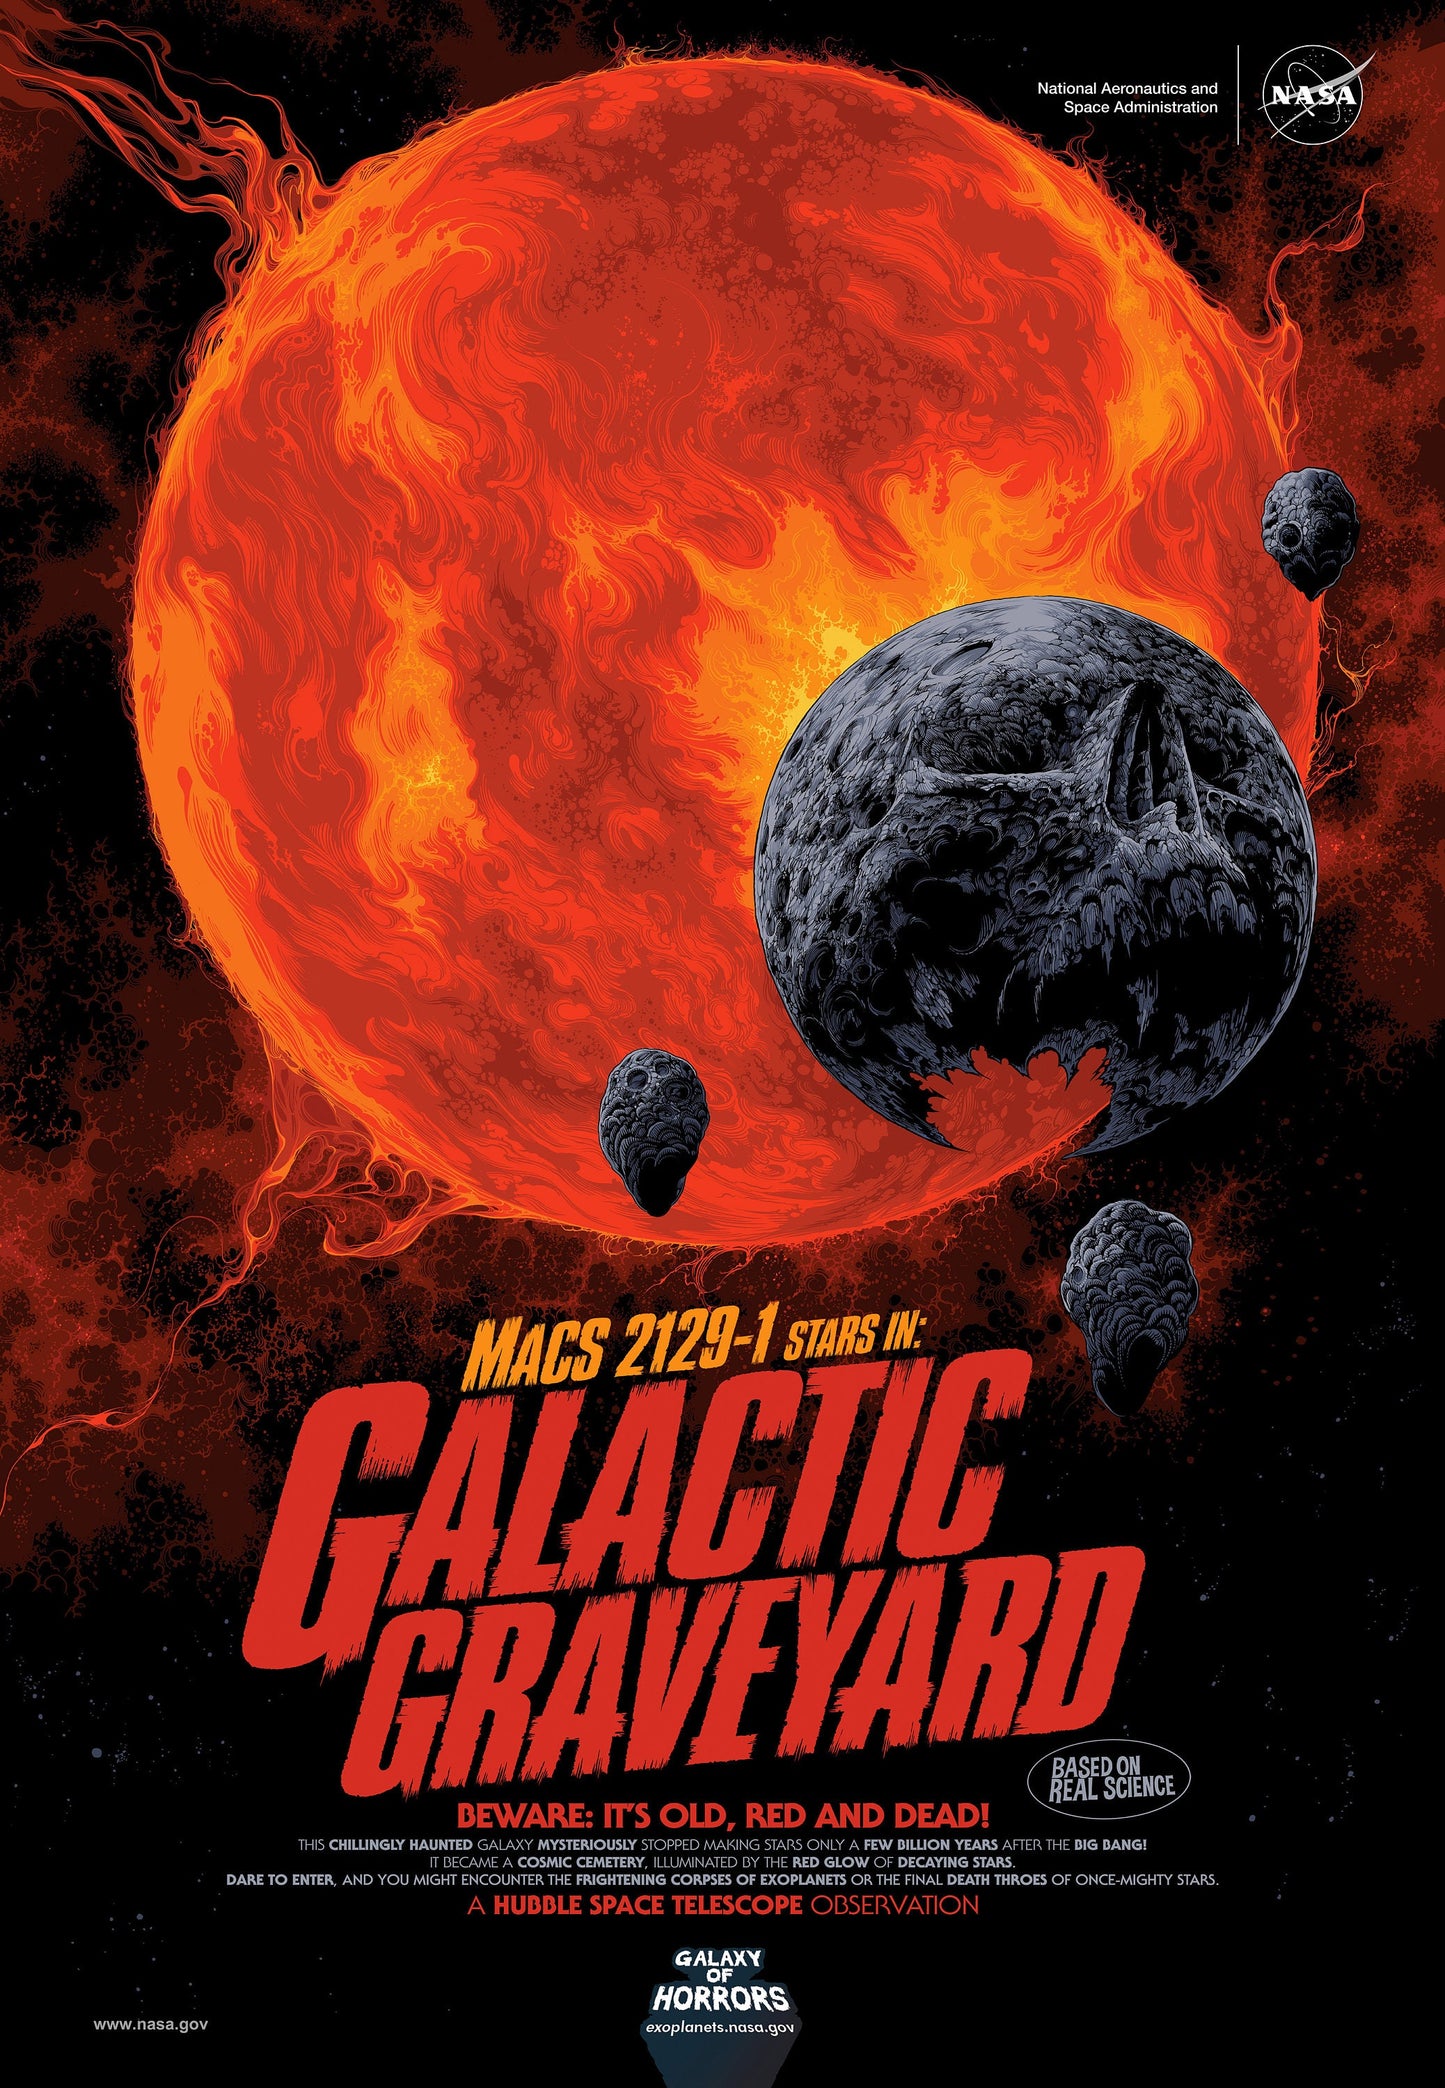 NASA's Galaxy of Horrors Sci-Fi Space Posters [9 Images]